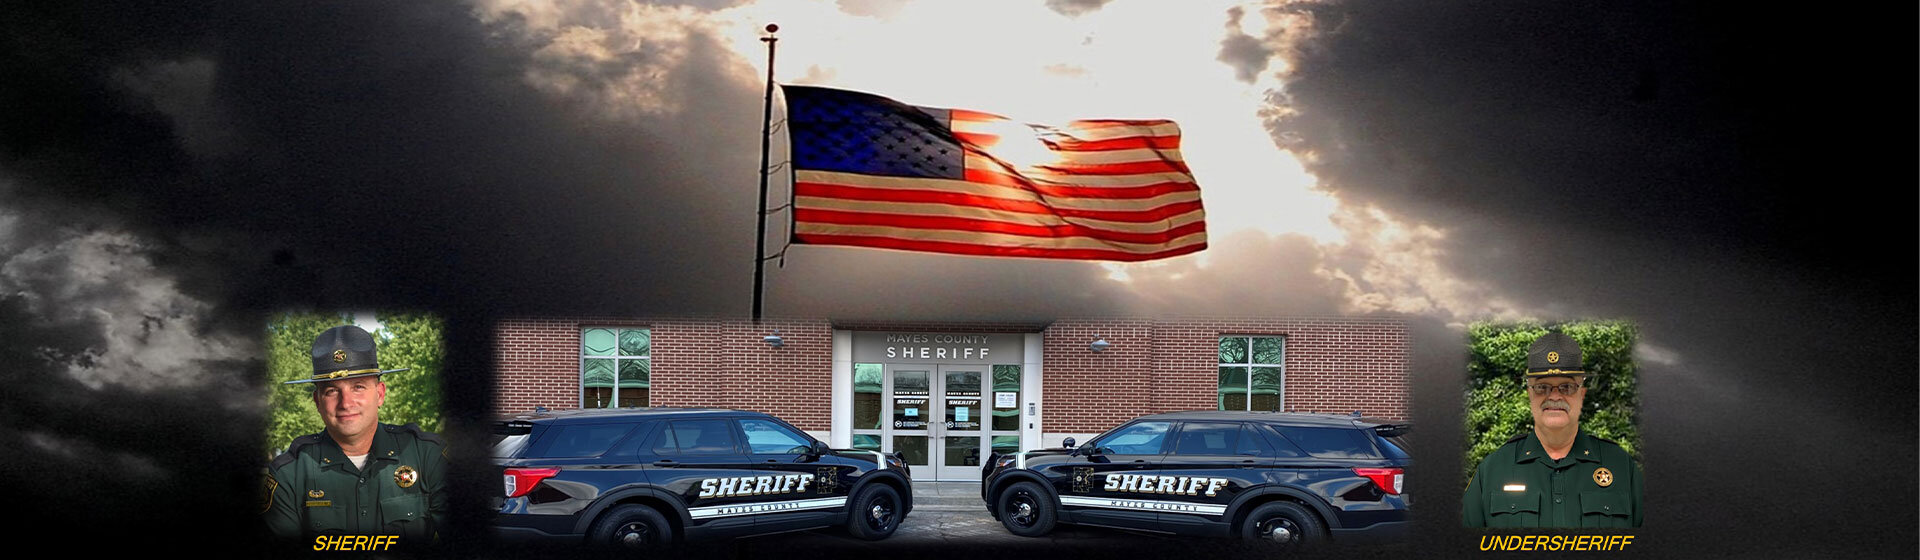 The Flag of the United States of America hovers above the sheriff's office. Two sheriff vehicles are parked on the outside.